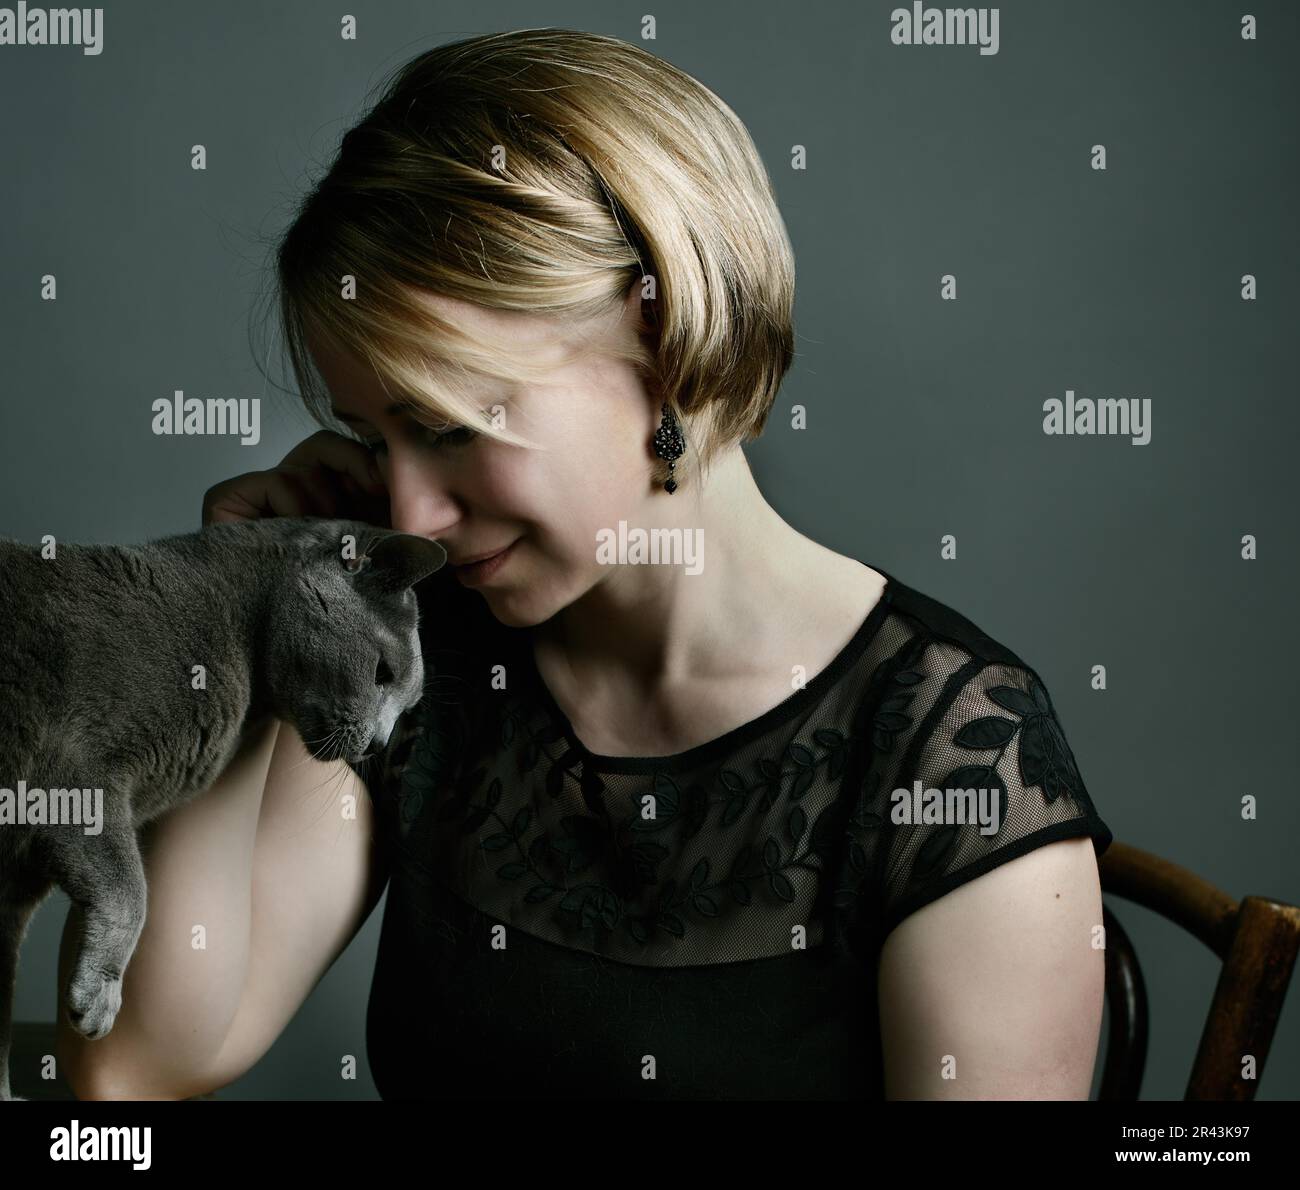 Portrait of a woman with her Russian Blue pedigree cat showing her affection Stock Photo